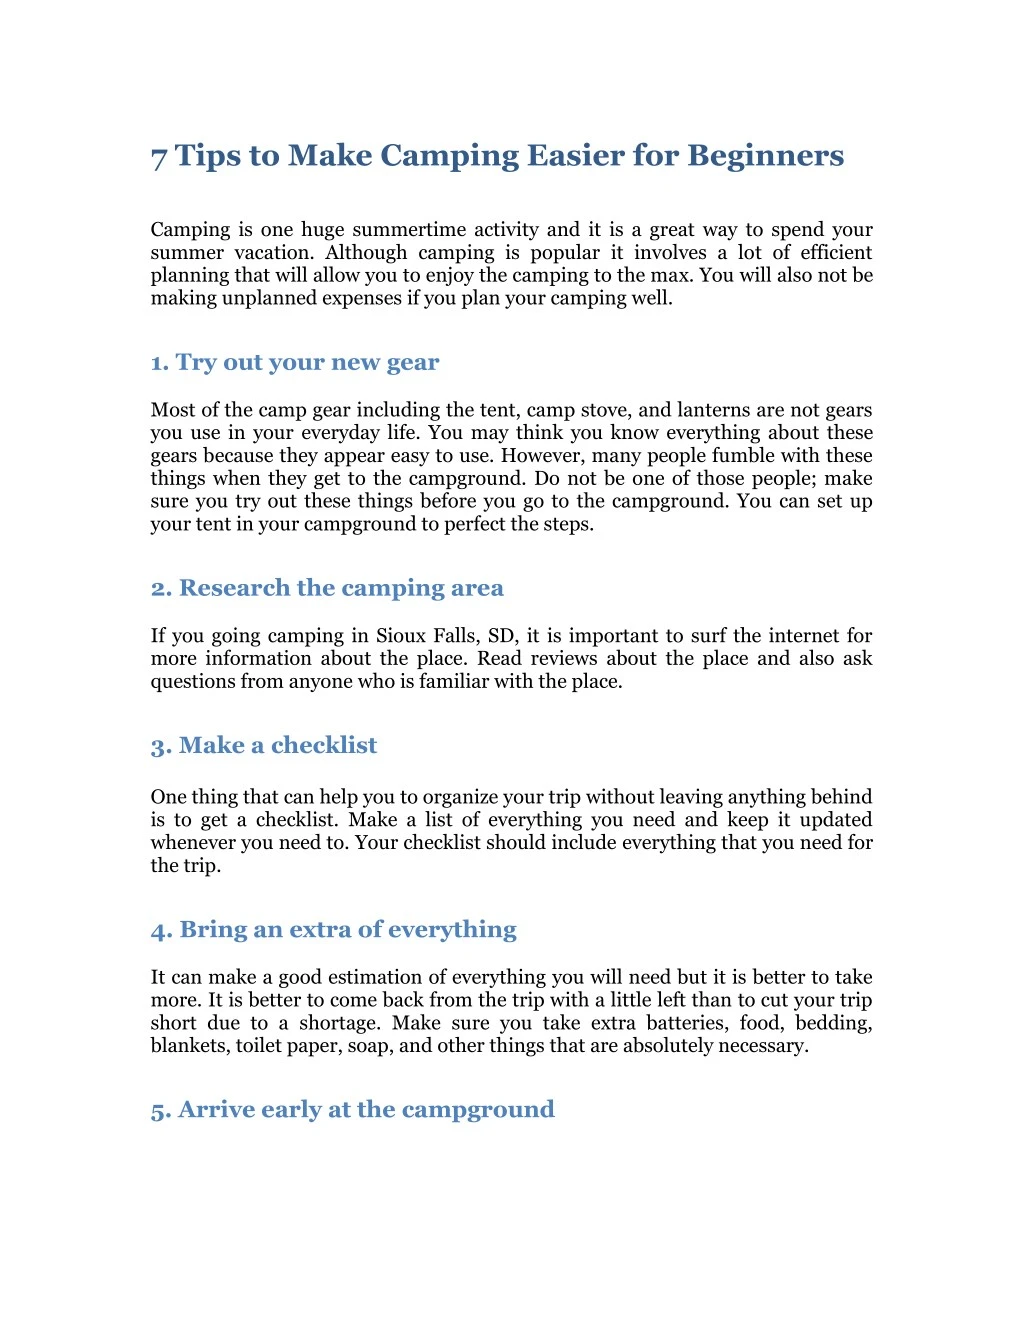 7 tips to make camping easier for beginners